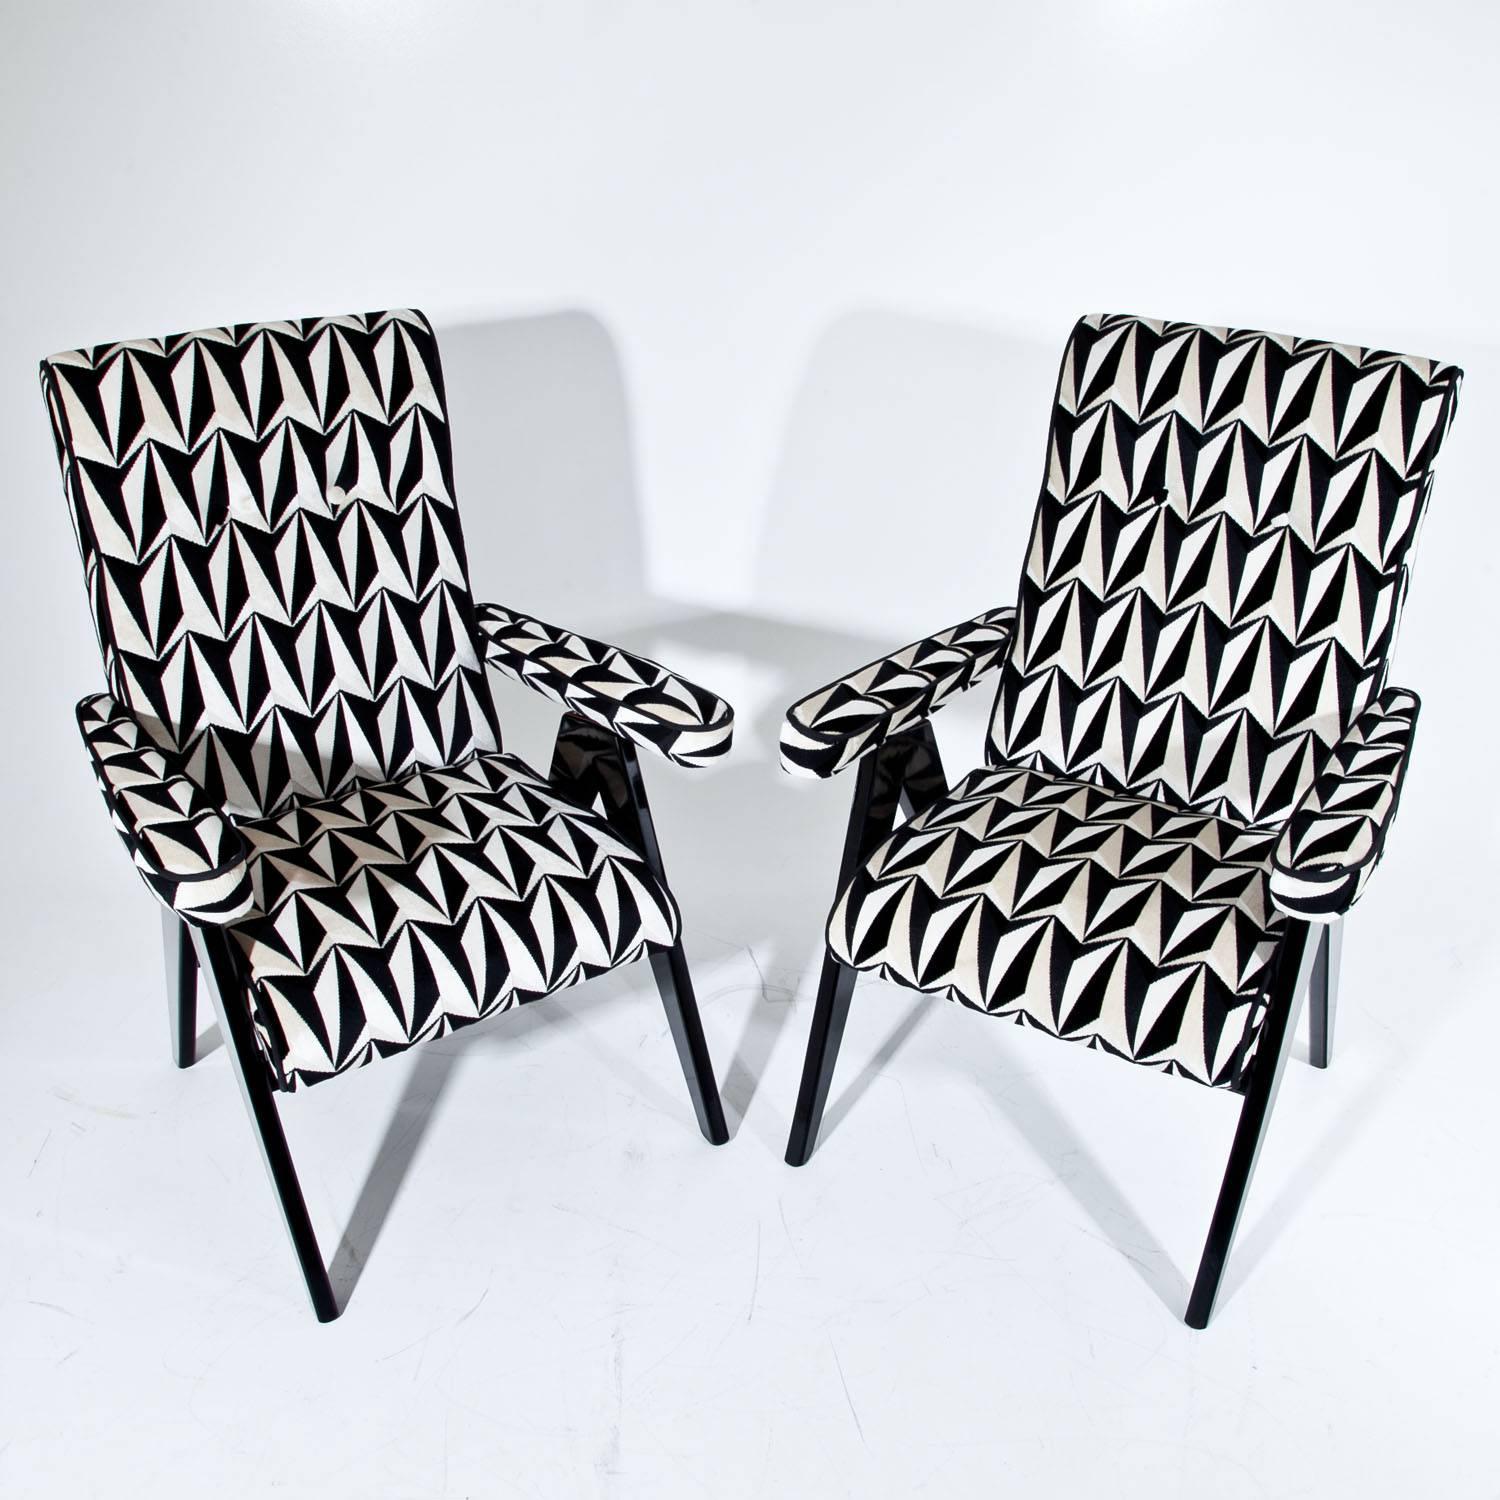 Pair of Italian midcentury armchairs with upholstered seats, backrests and armrests. The seats and backrests were reupholstered with a high quality black-and-white designer fabric by Eley Kishimoto.